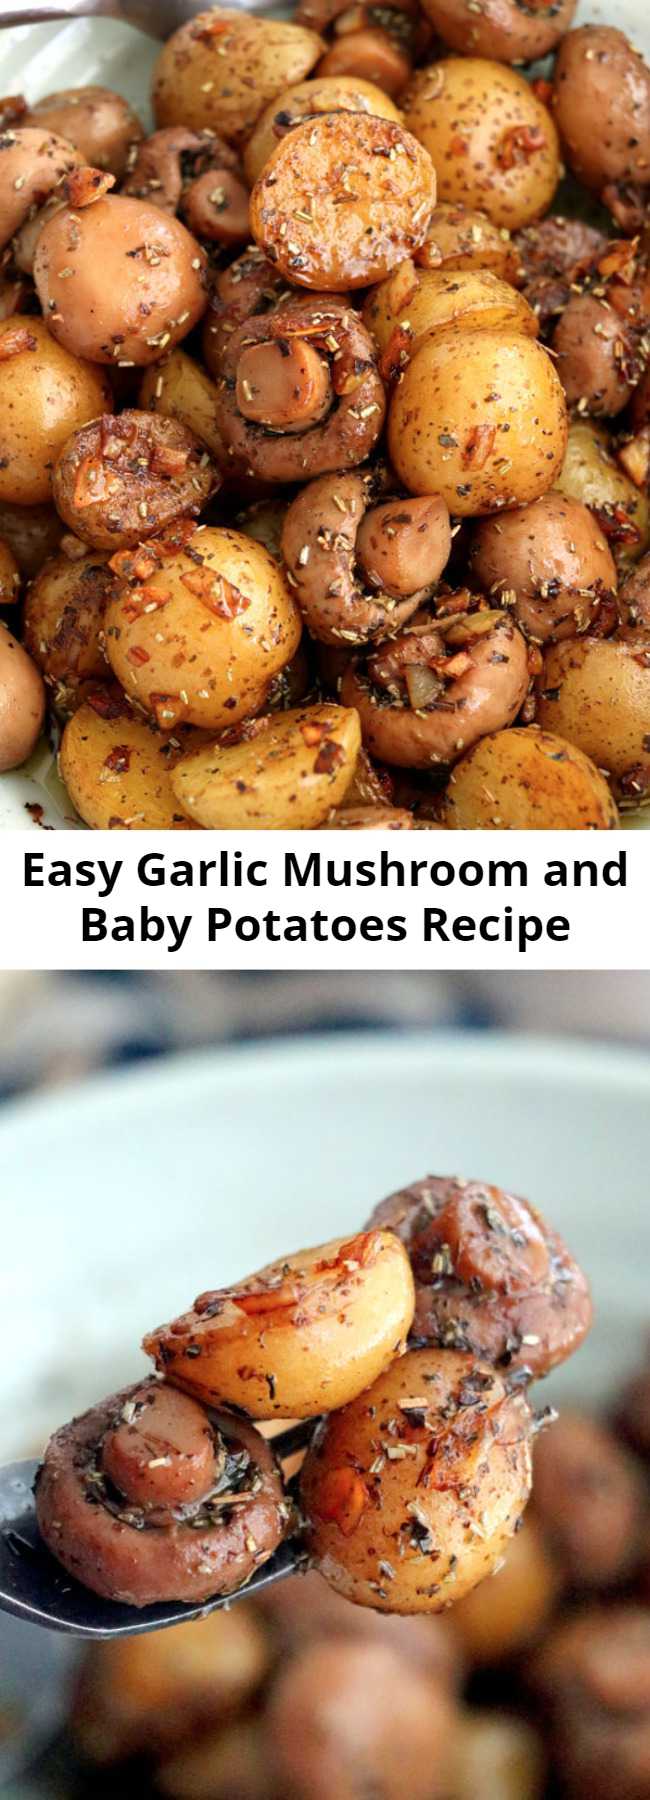 Easy Garlic Mushroom and Baby Potatoes Recipe - A buttery dish of pan-roasted Garlic Mushroom and Baby Potatoes with herbs. So simple and very easy to make with elegant results that make for a delicious side or appetizer.